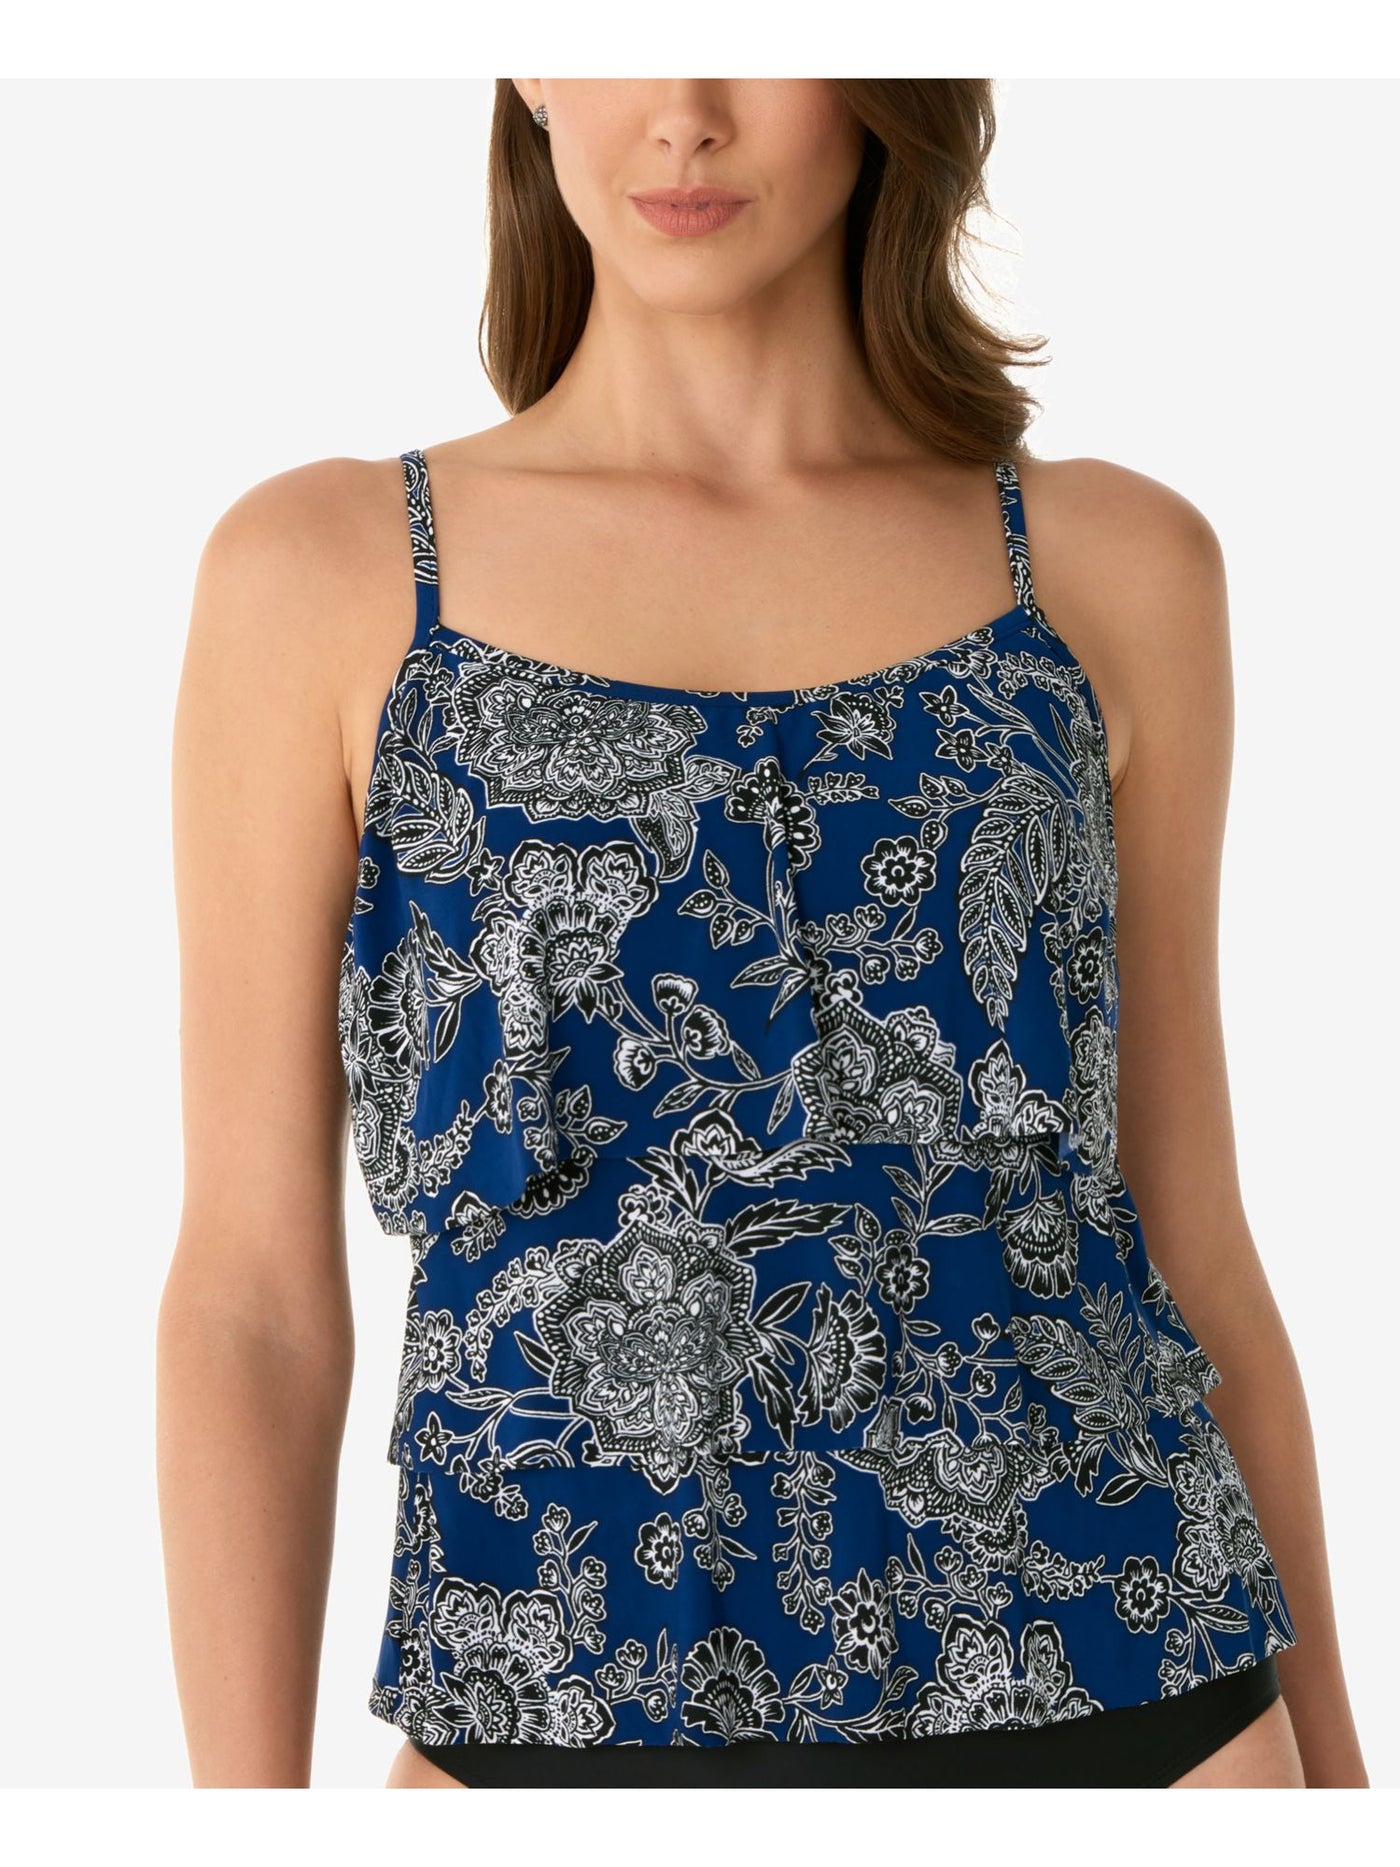 SWIM SOLUTIONS Women's Navy Paisley Stretch Full Bust Support Lined Adjustable Tiered Scoop Neck Tankini Swimsuit Top 10